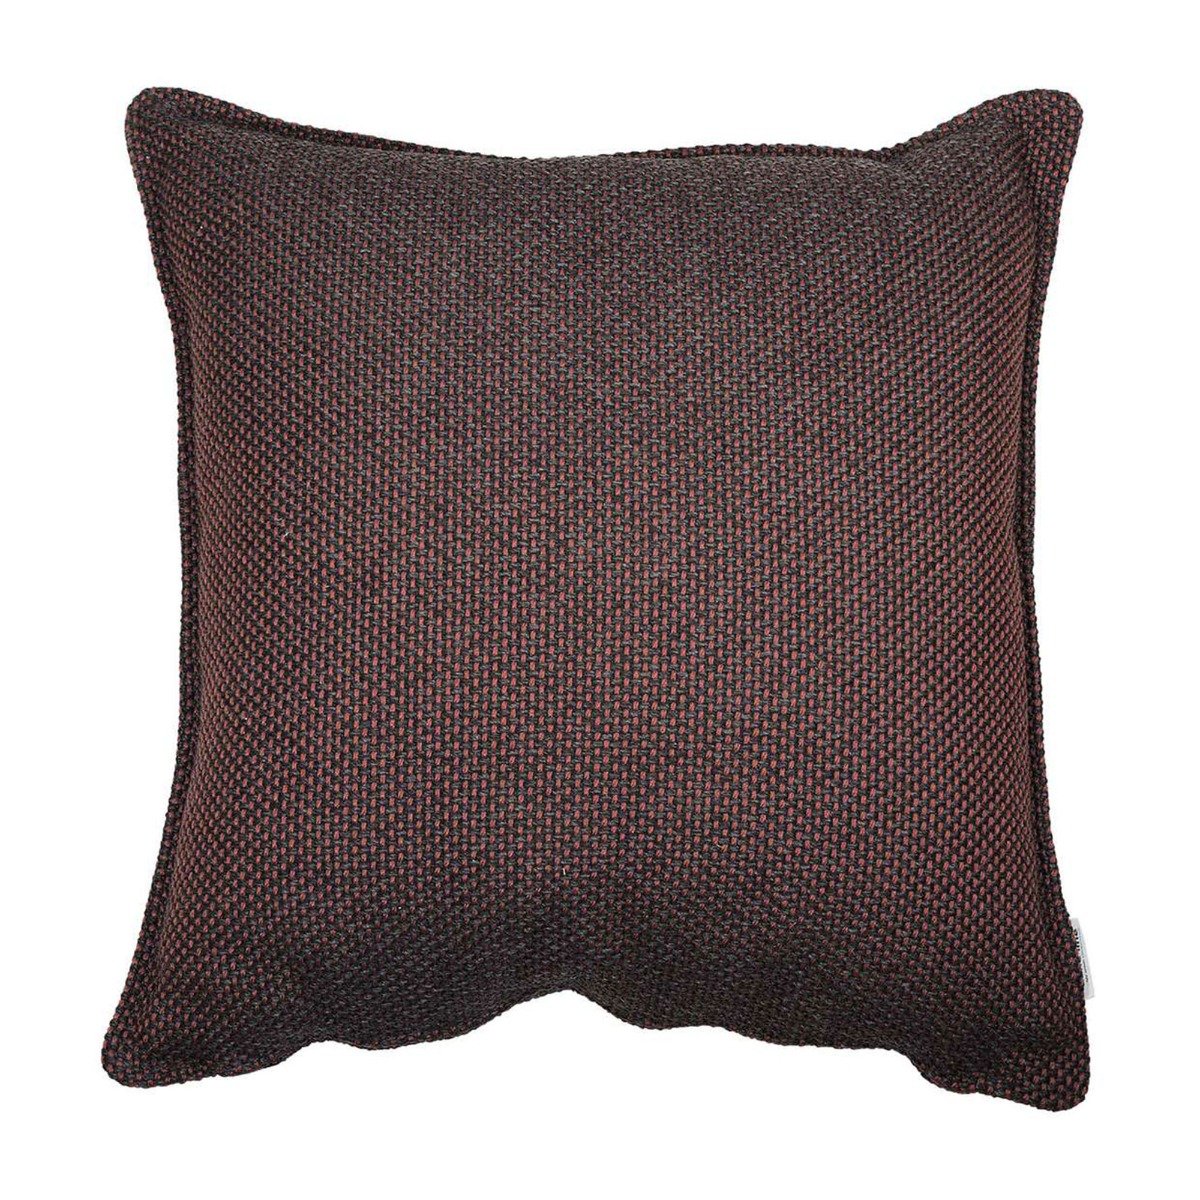 Cane Line Focus Scatter Cushion 50x50x12cm, Square, Red | Barker & Stonehouse